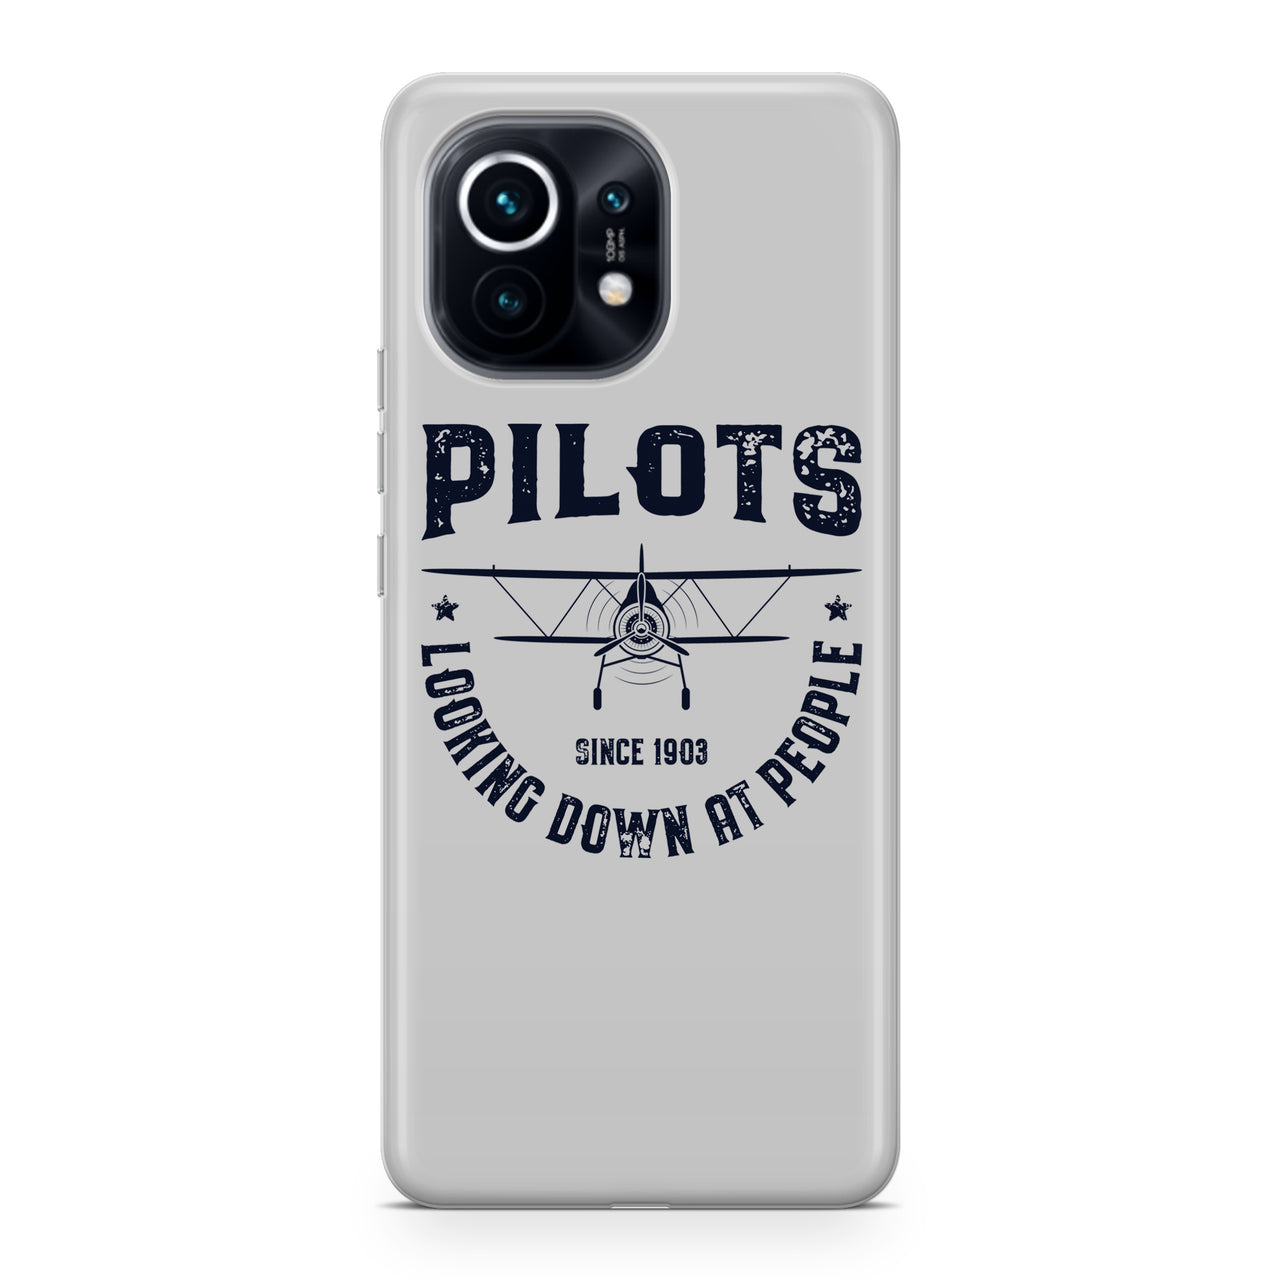 Pilots Looking Down at People Since 1903 Designed Xiaomi Cases